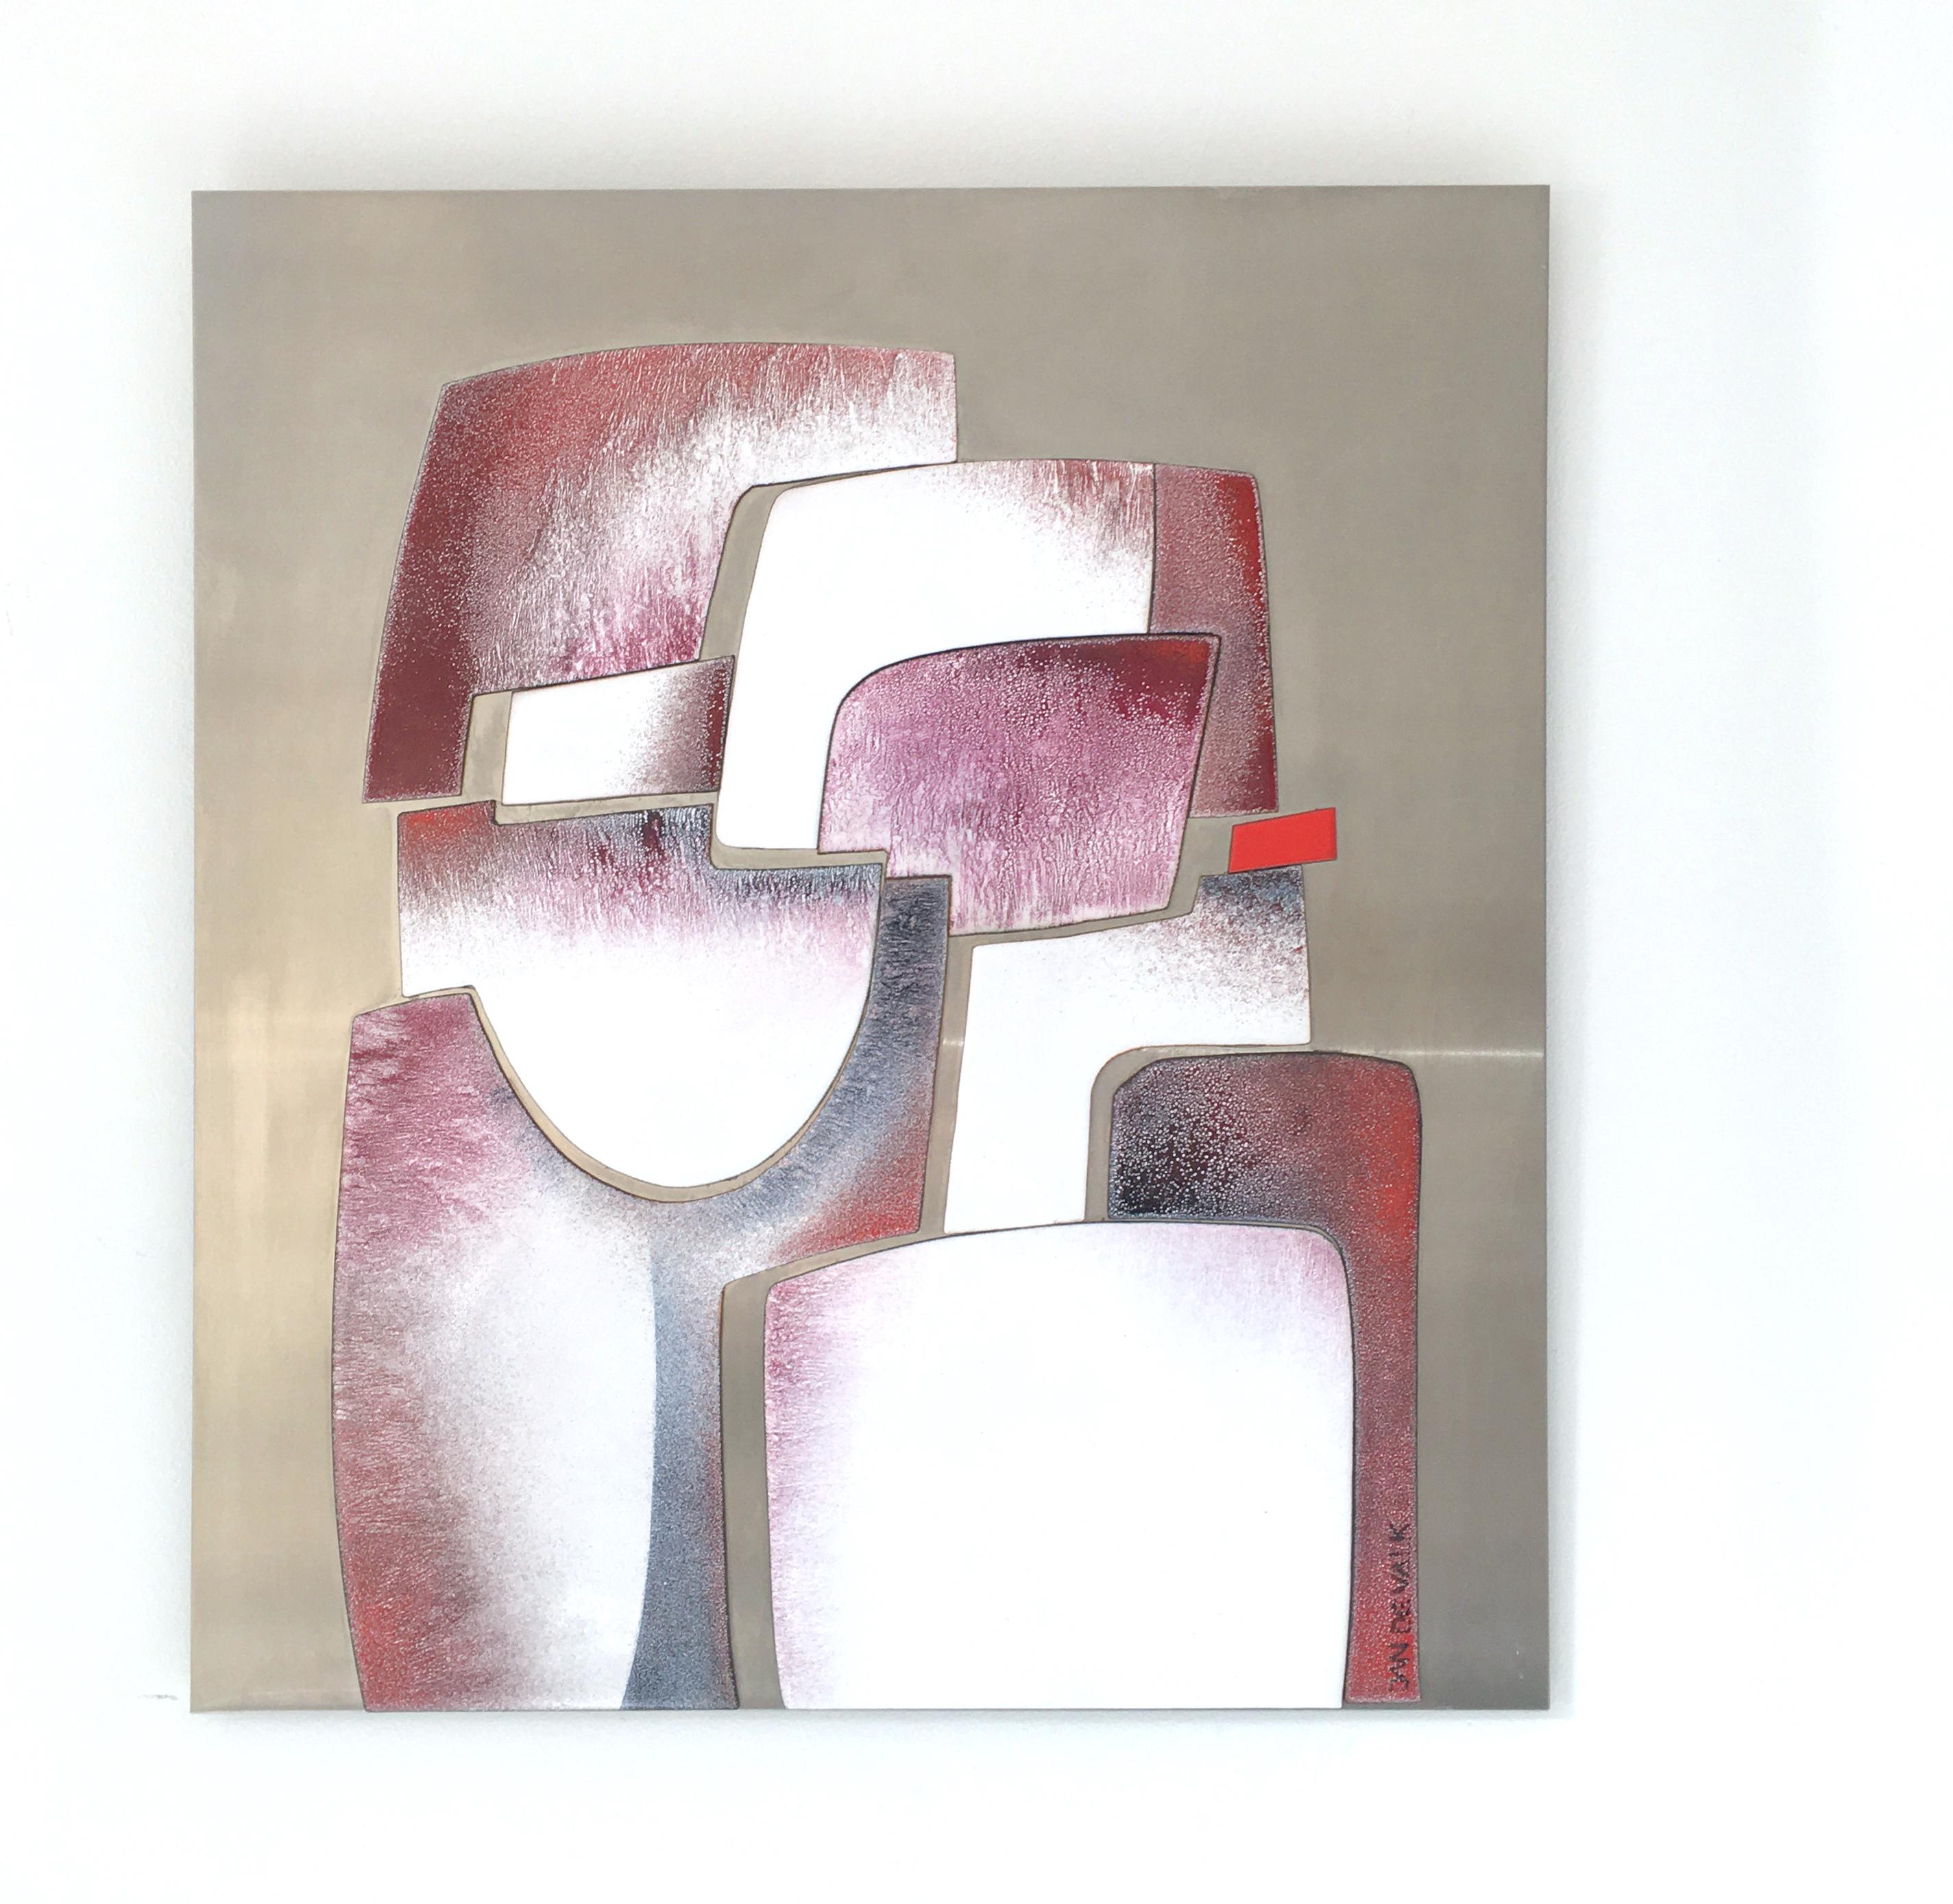 Dutch Brutalist Abstract Enamel Wall Artwork in Red Tones, 1980s